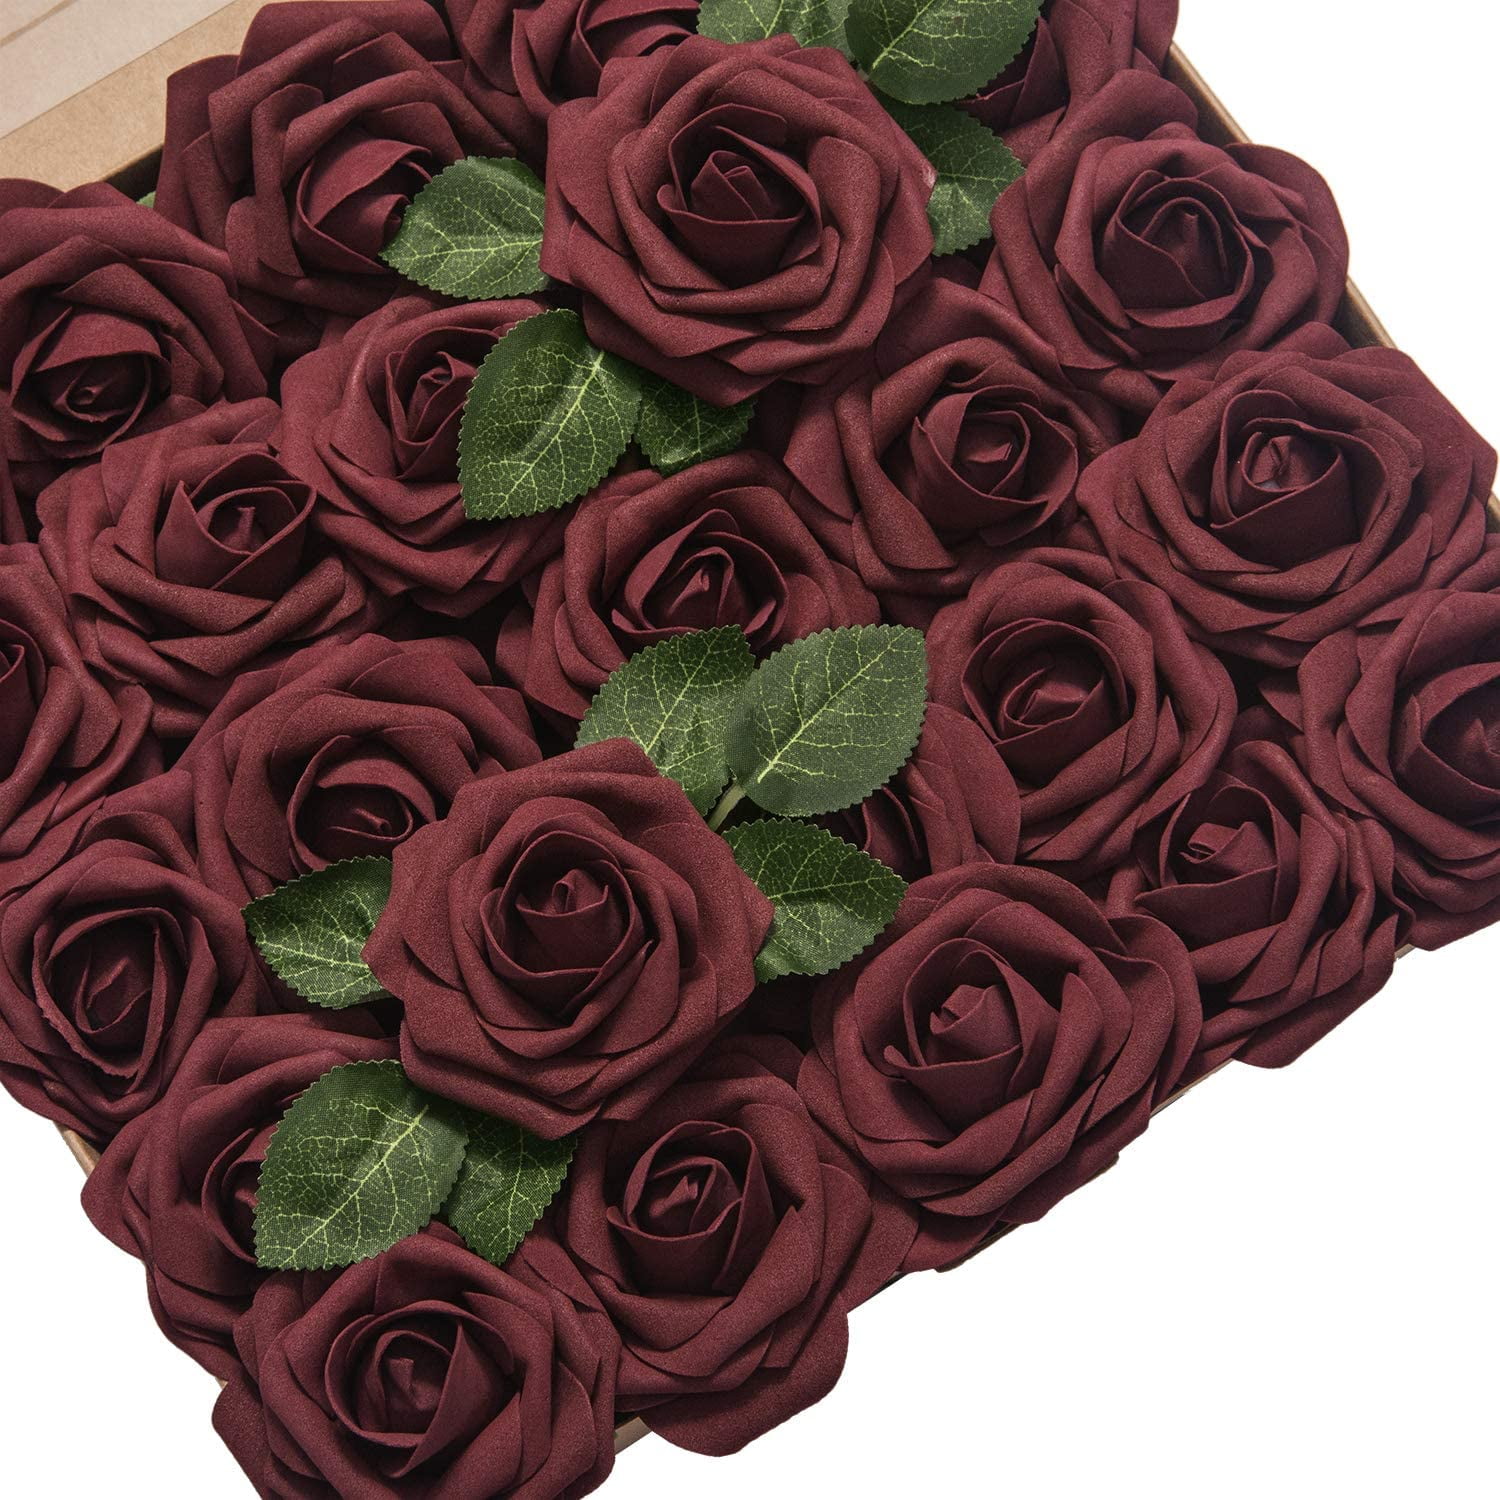  IPOPU Burgundy Artificial Flowers Roses Heads, 25pcs Fake Dried  Roses Flowers Artificial for Decoration for Dried Floral Bouquet Bridal  Party Centerpieces Bridal Bouquets for Wedding (Burgundy) : Home & Kitchen